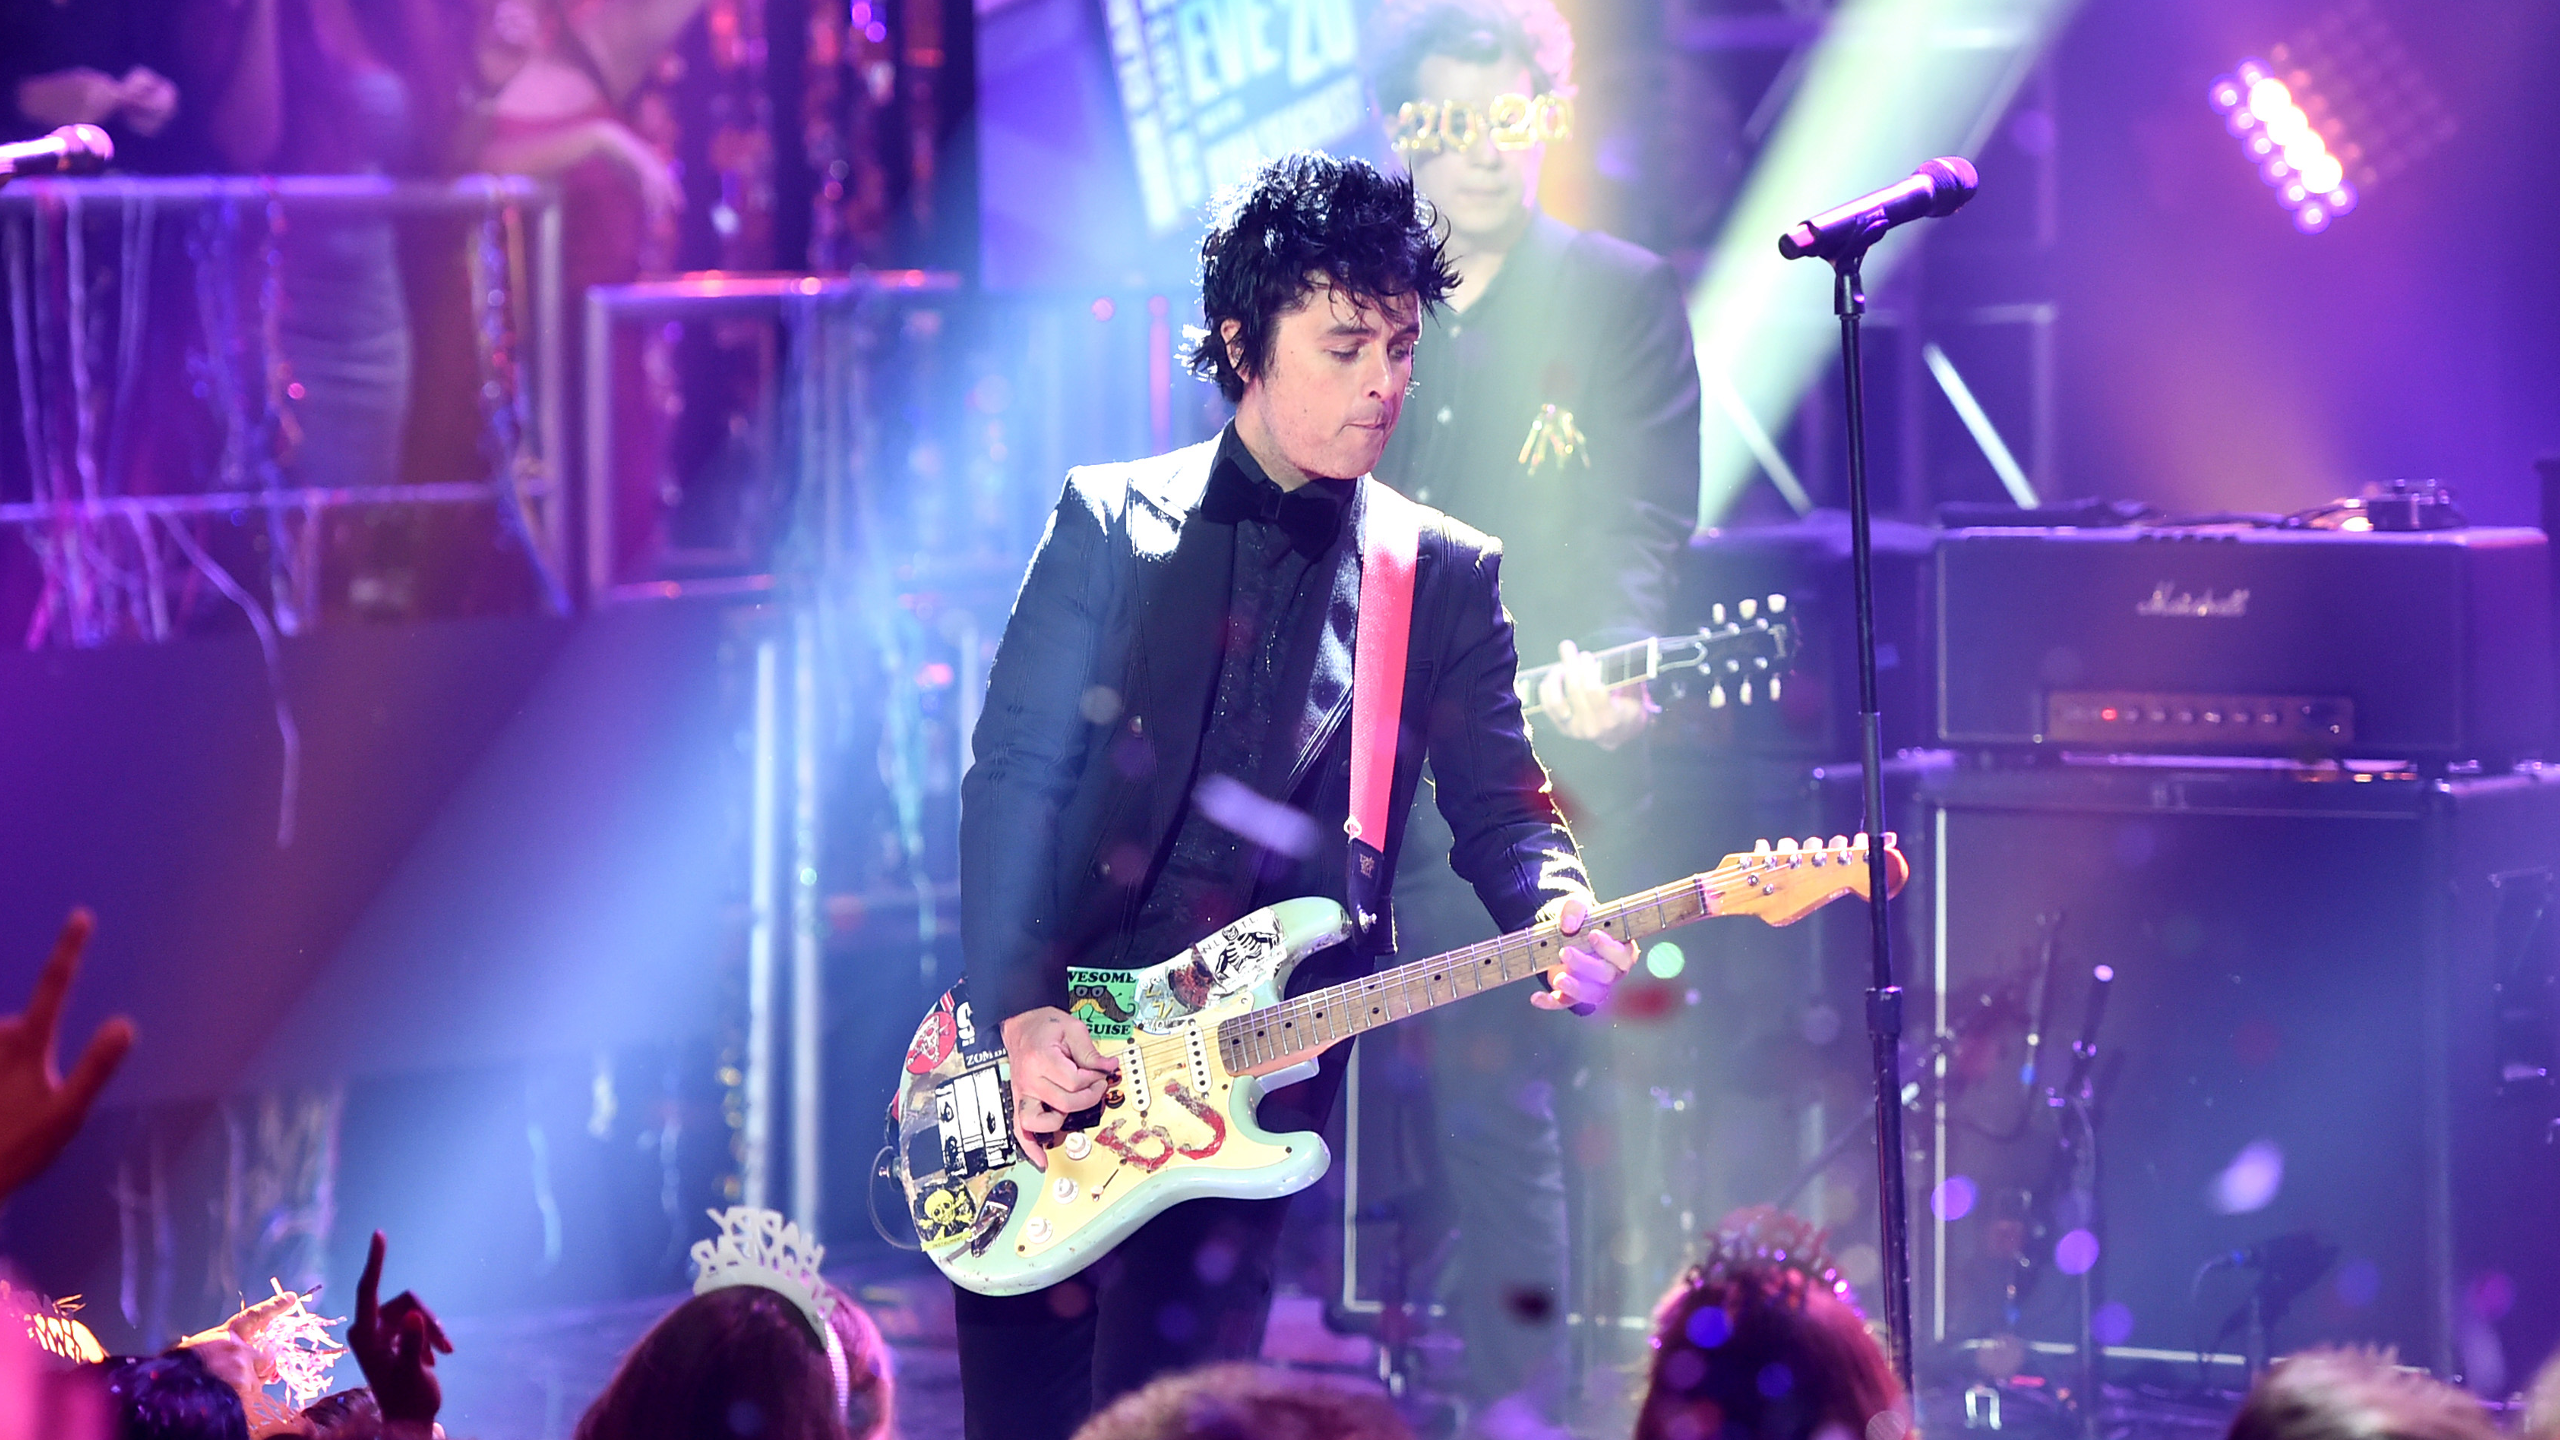 Billy Joe Armstrong Performs on New Years Eve